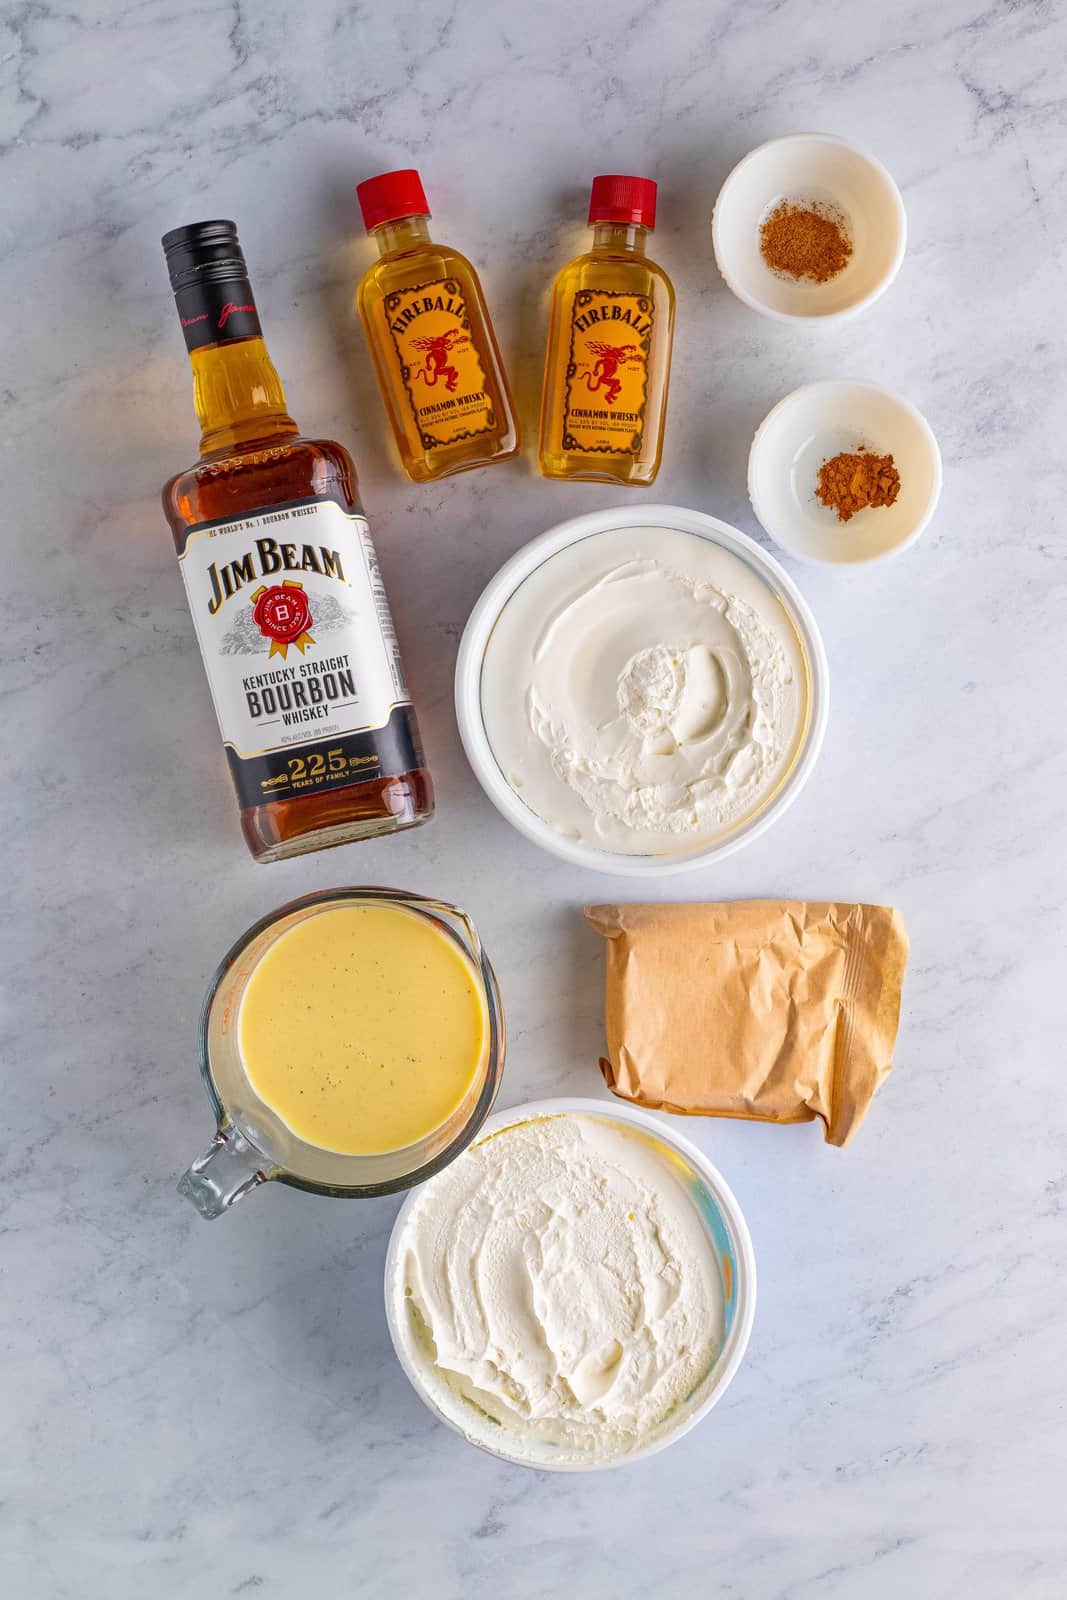 Ingredients needed: instant vanilla pudding mix, eggnog, bourbon, fireball cinnamon whiskey, ground cinnamon, ground nutmeg and whipped topping.